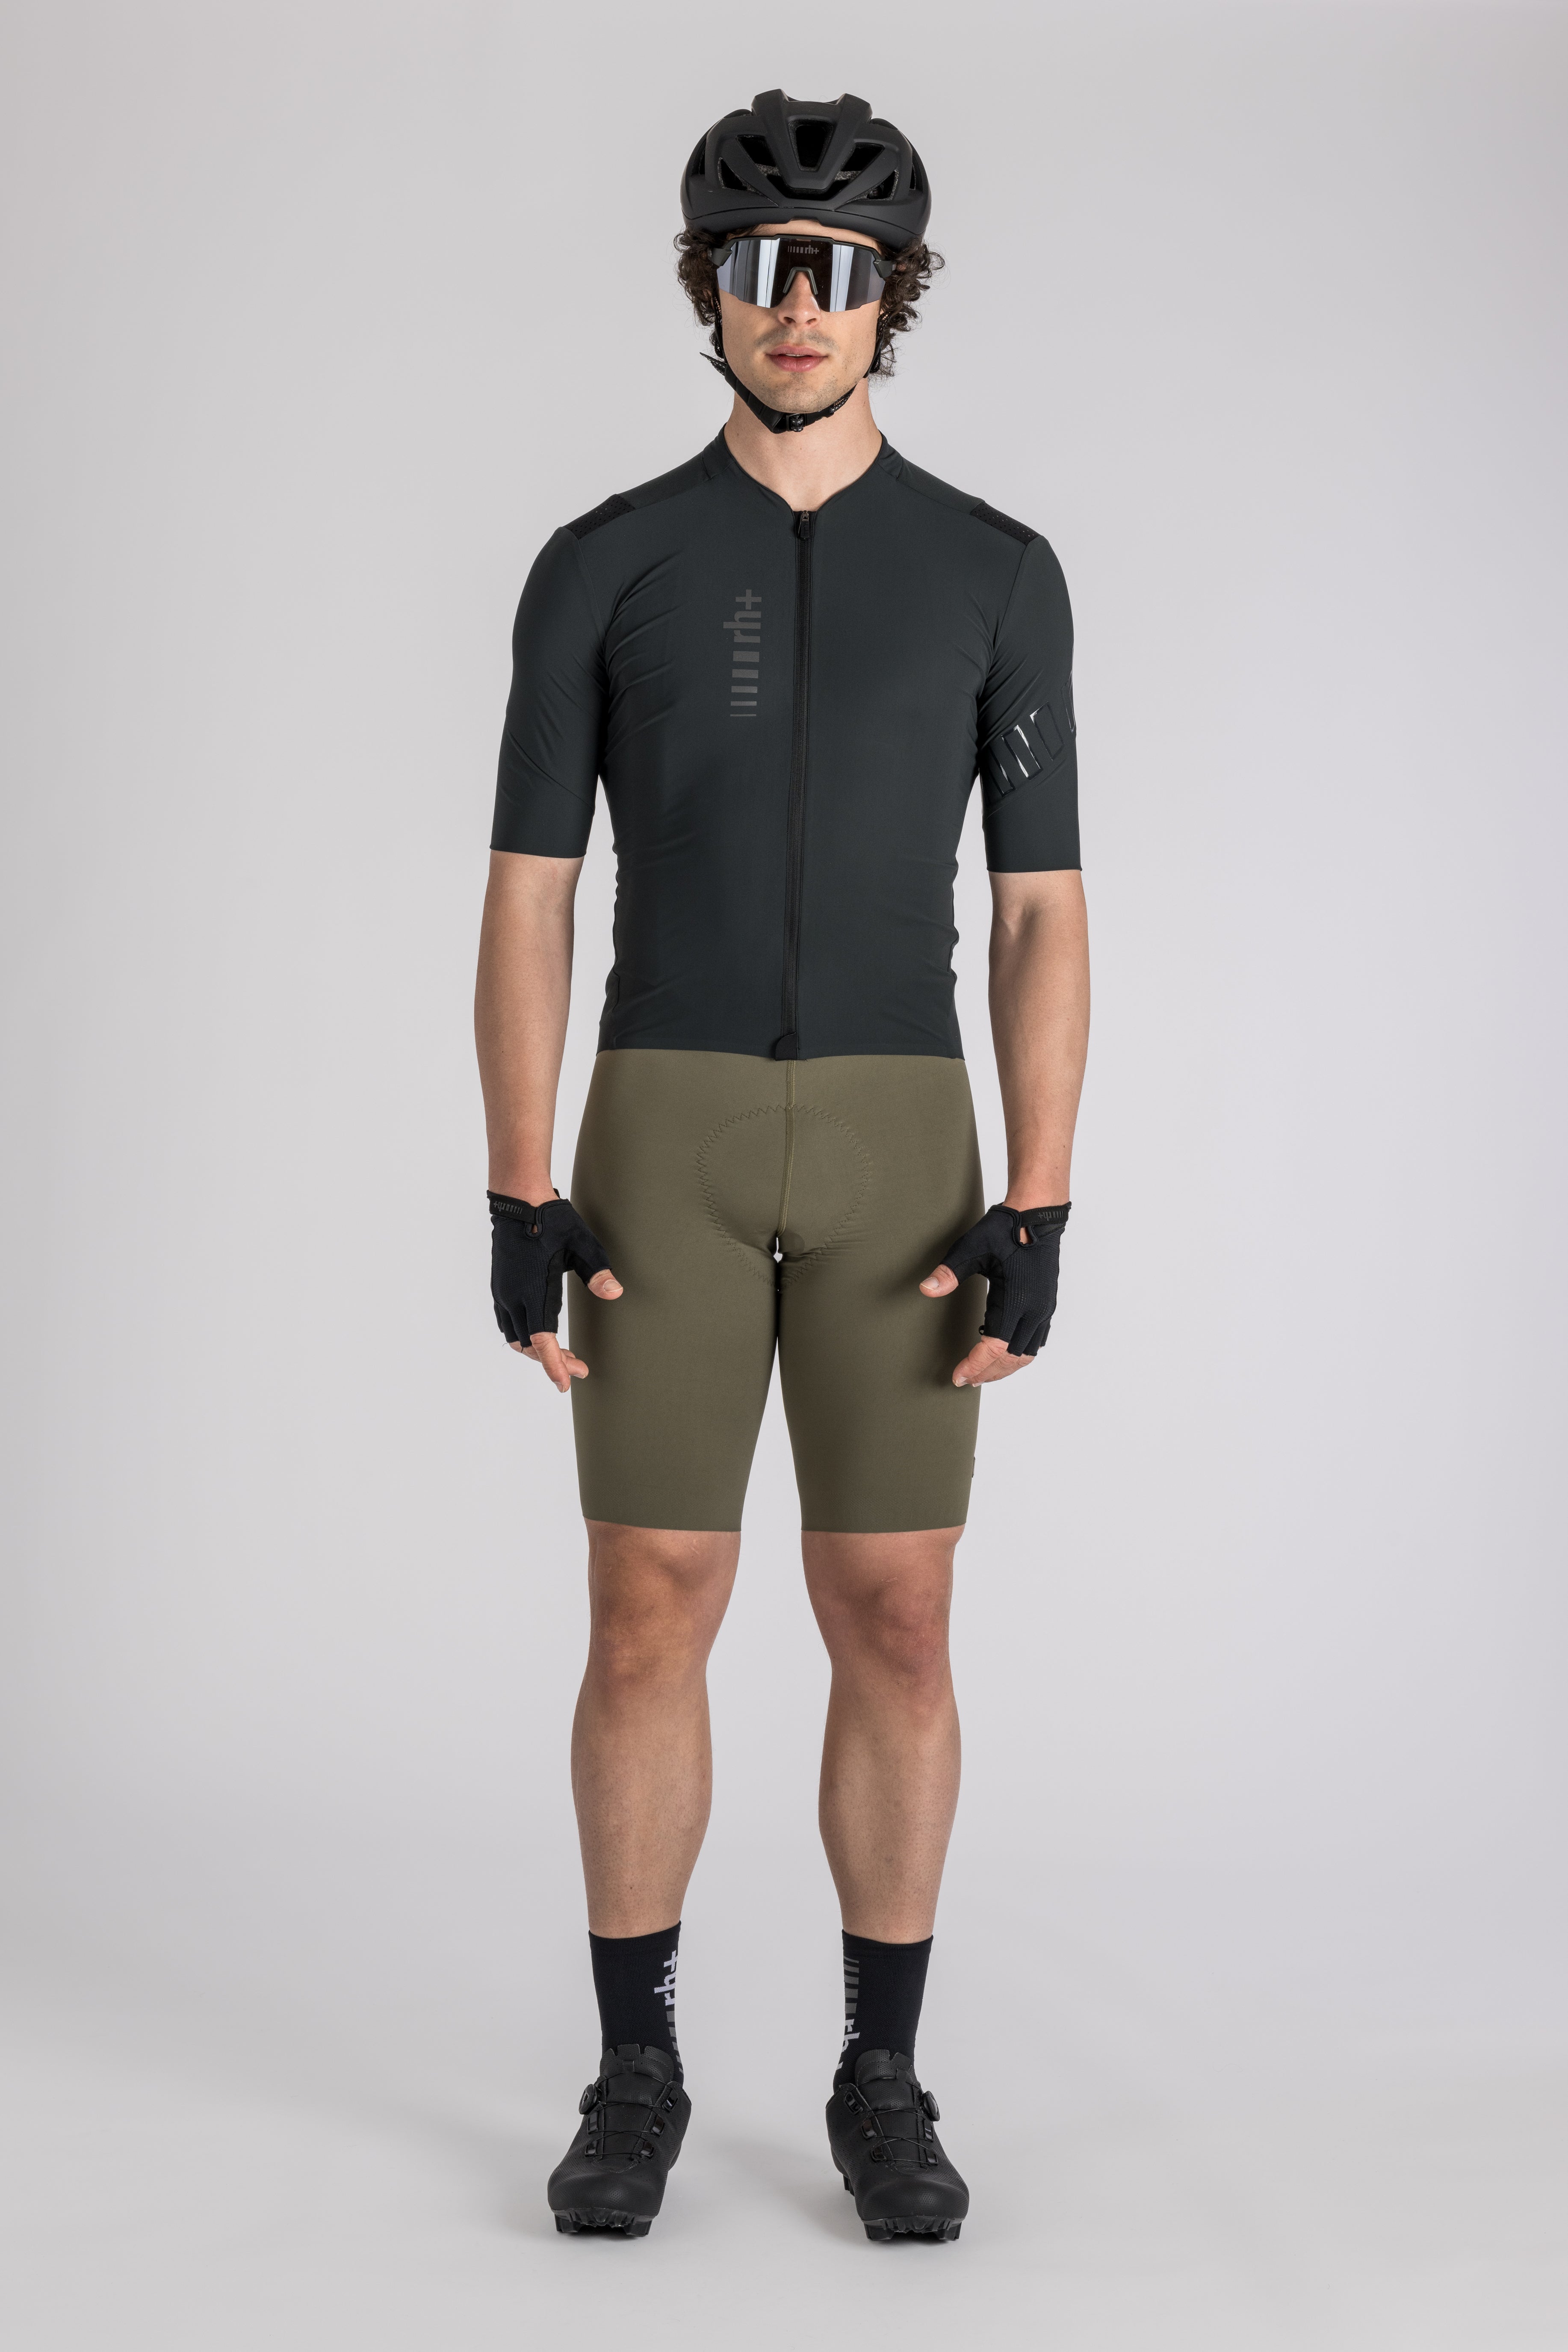 Men's Cycling Apparel: Clothes and Accessories for Biking | rh+